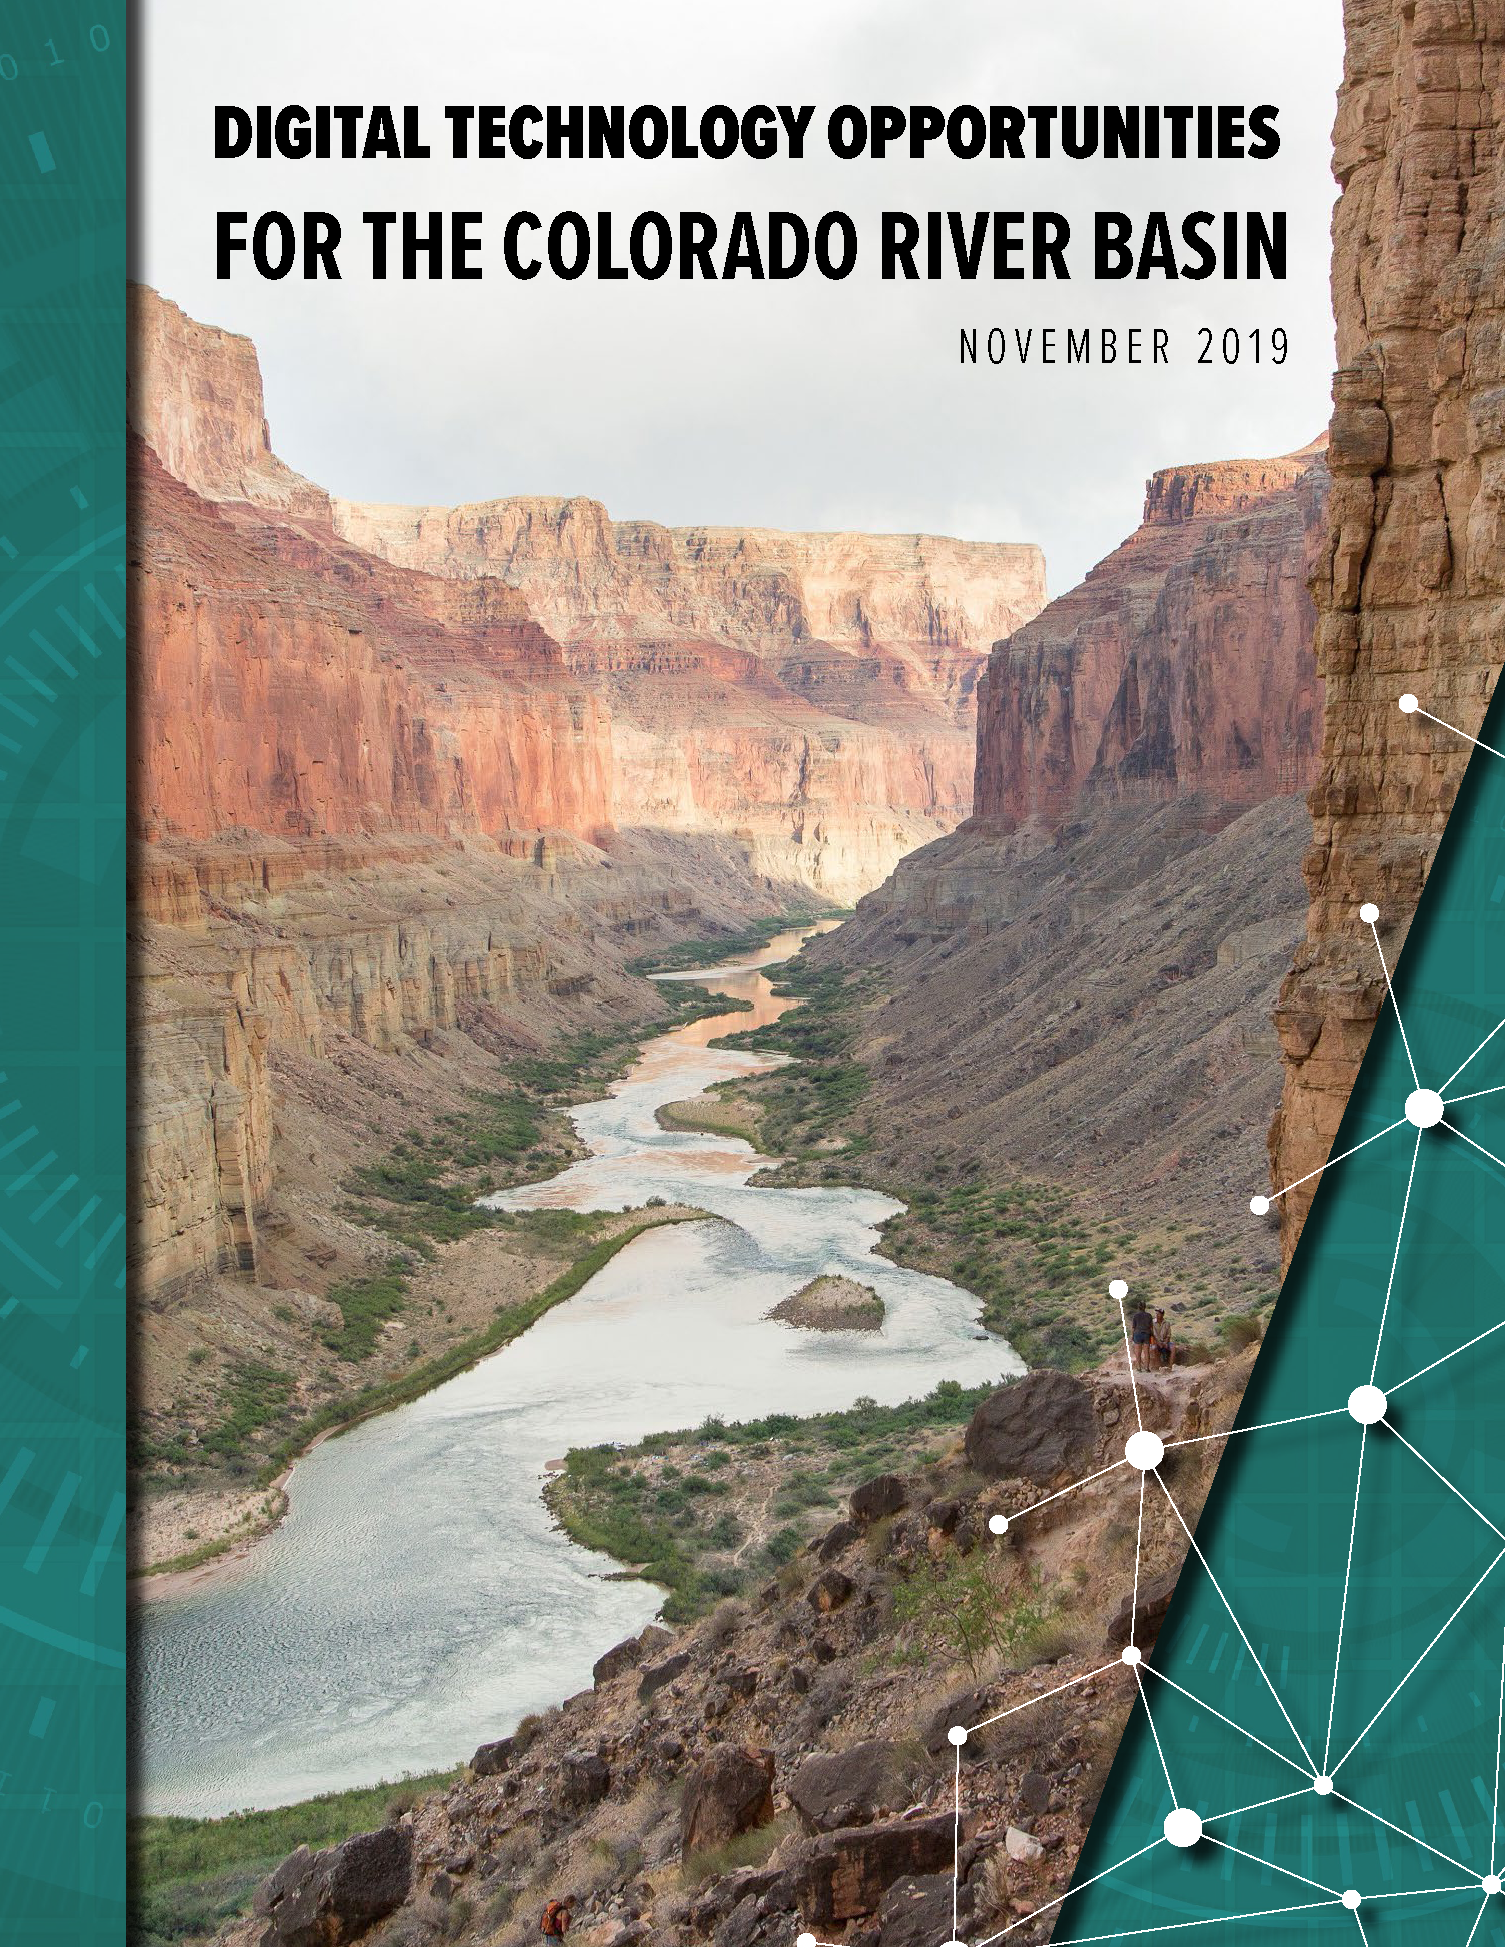 "Digital Technology Solutions for the Colorado River Basin"